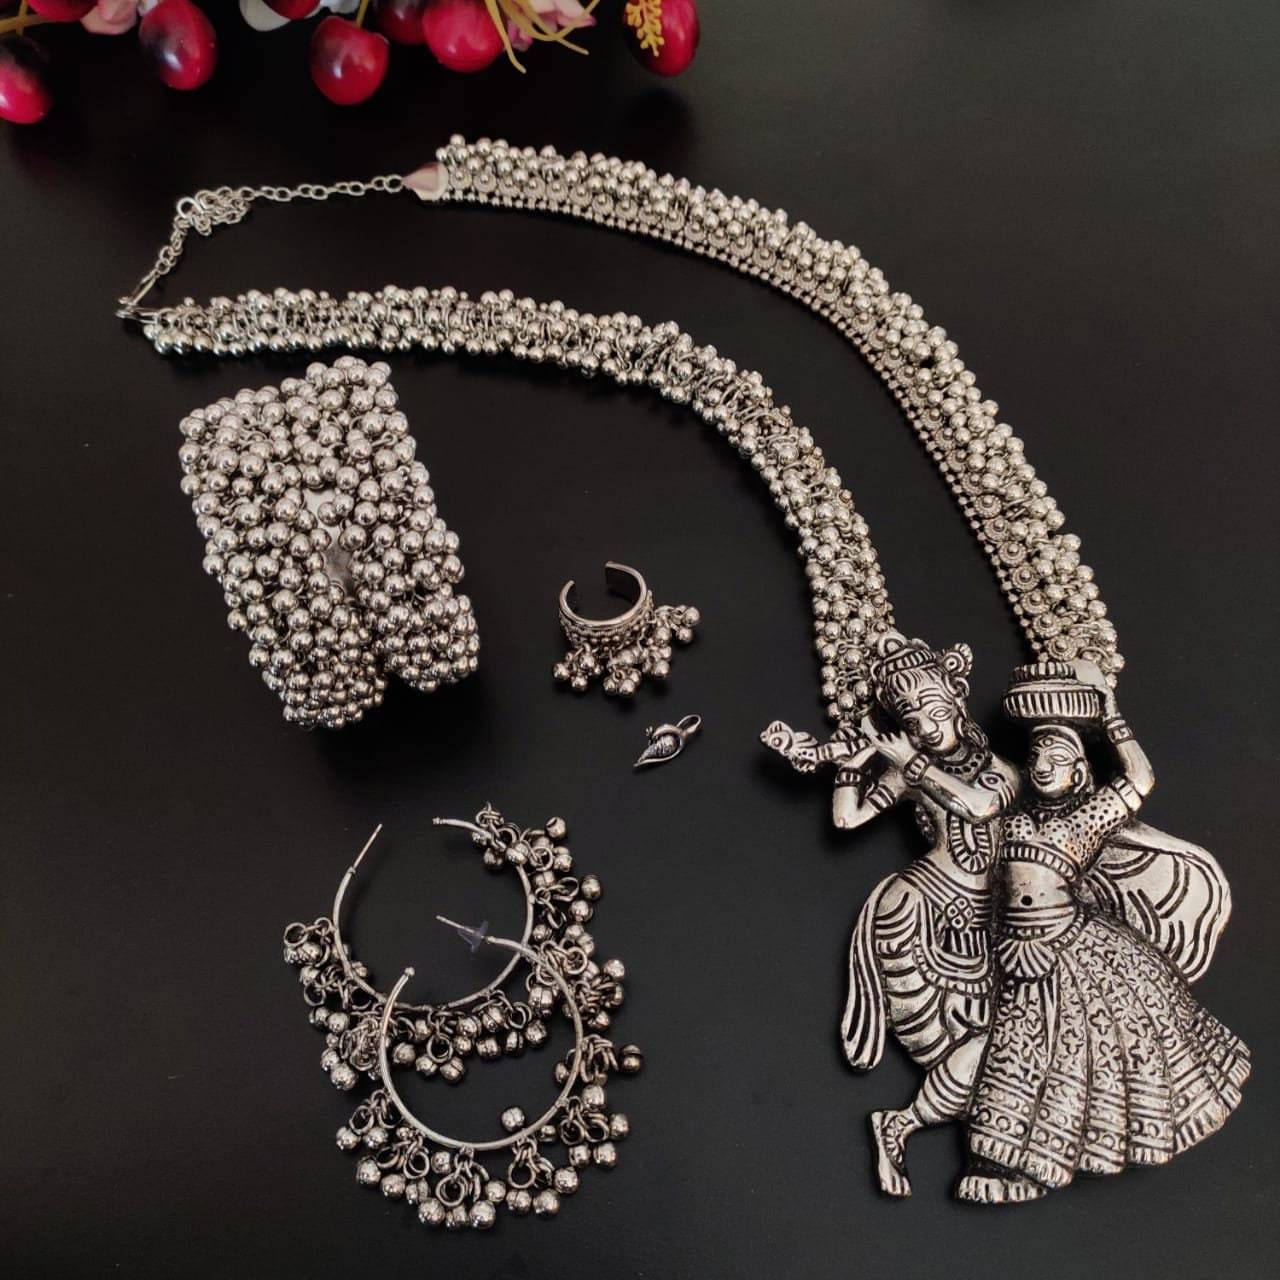 These stylish Choker Jewelry set from VASTRABHUSHAN will certainly leave you spellbound. These Choker set have an excellent finish and gives out an exquisite sense of style. If you are looking for an amazing Fashion Jewelry set for special occasions such as Anniversary, Engagement, Party, Wedding or for gifting , then your search ends here.Set includes - Choker, EarringsThe look is stunning and preciously suitable for all kinds of dressy occasions.COLOR : Same as PictureFor - Girls & WomenOCCASI